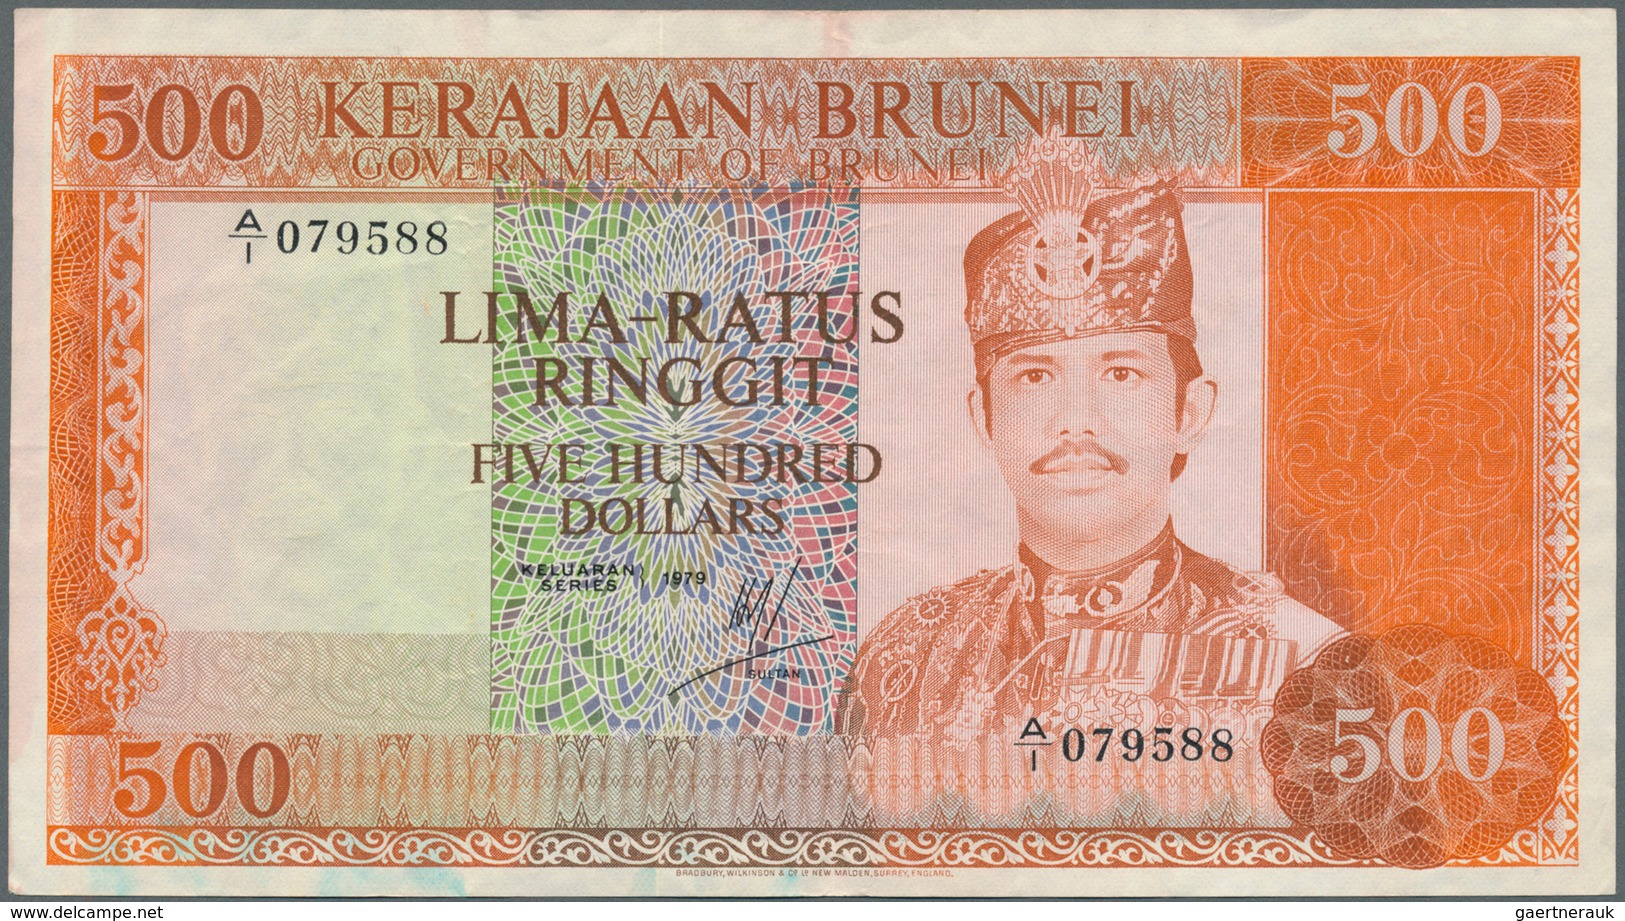 01183 Brunei: 500 Ringgit 1979 P. 11 In Lightly Used Condition, With Several Folds And Creases But No Hole - Brunei